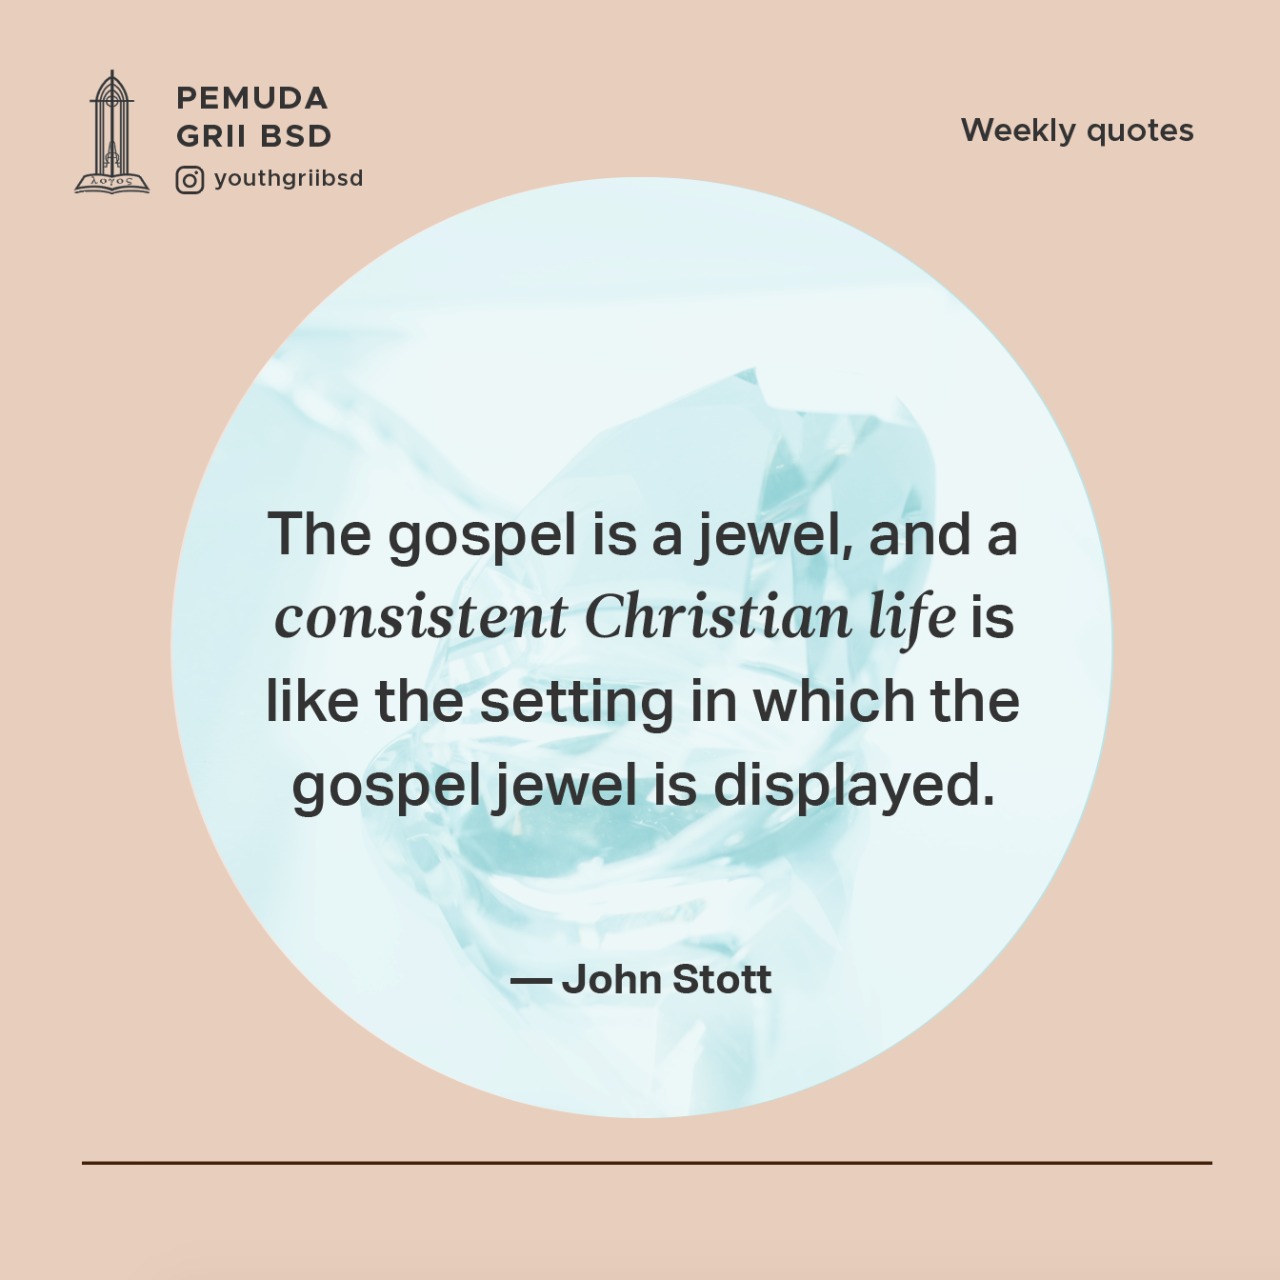 The gospel is a jewel, and a consistent Christian life is like the setting in which the gospel jewel is displayed.